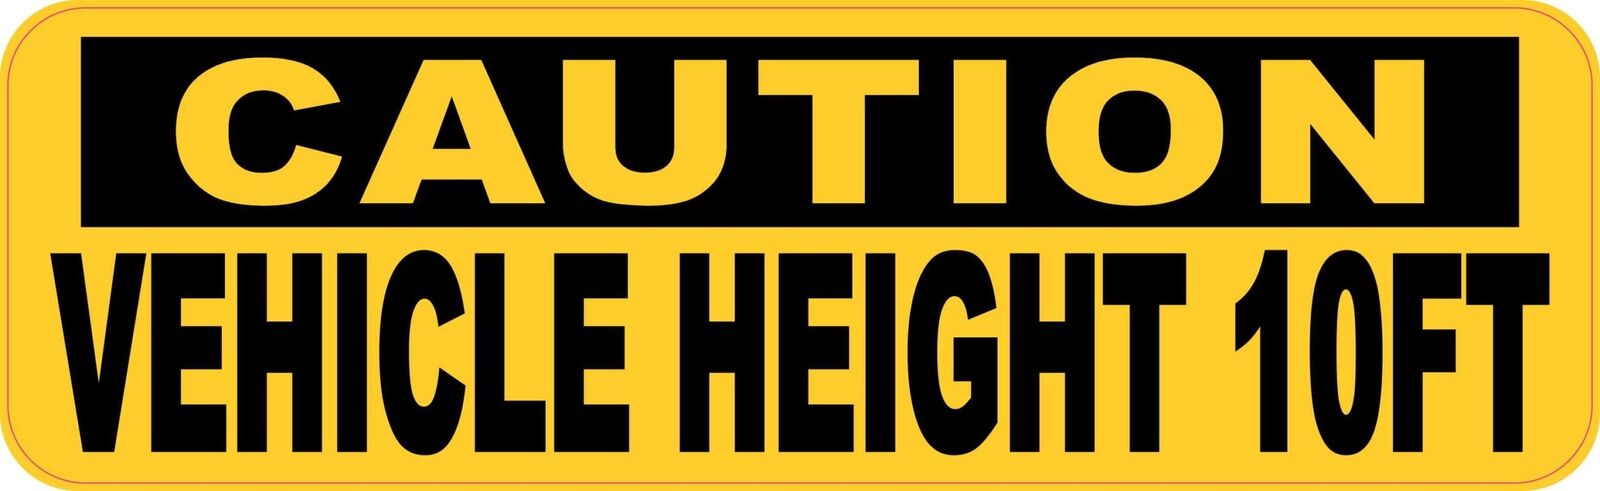 10in x 3in Vehicle Height 10FT Vinyl Sticker Car Truck Business Bumper Decal